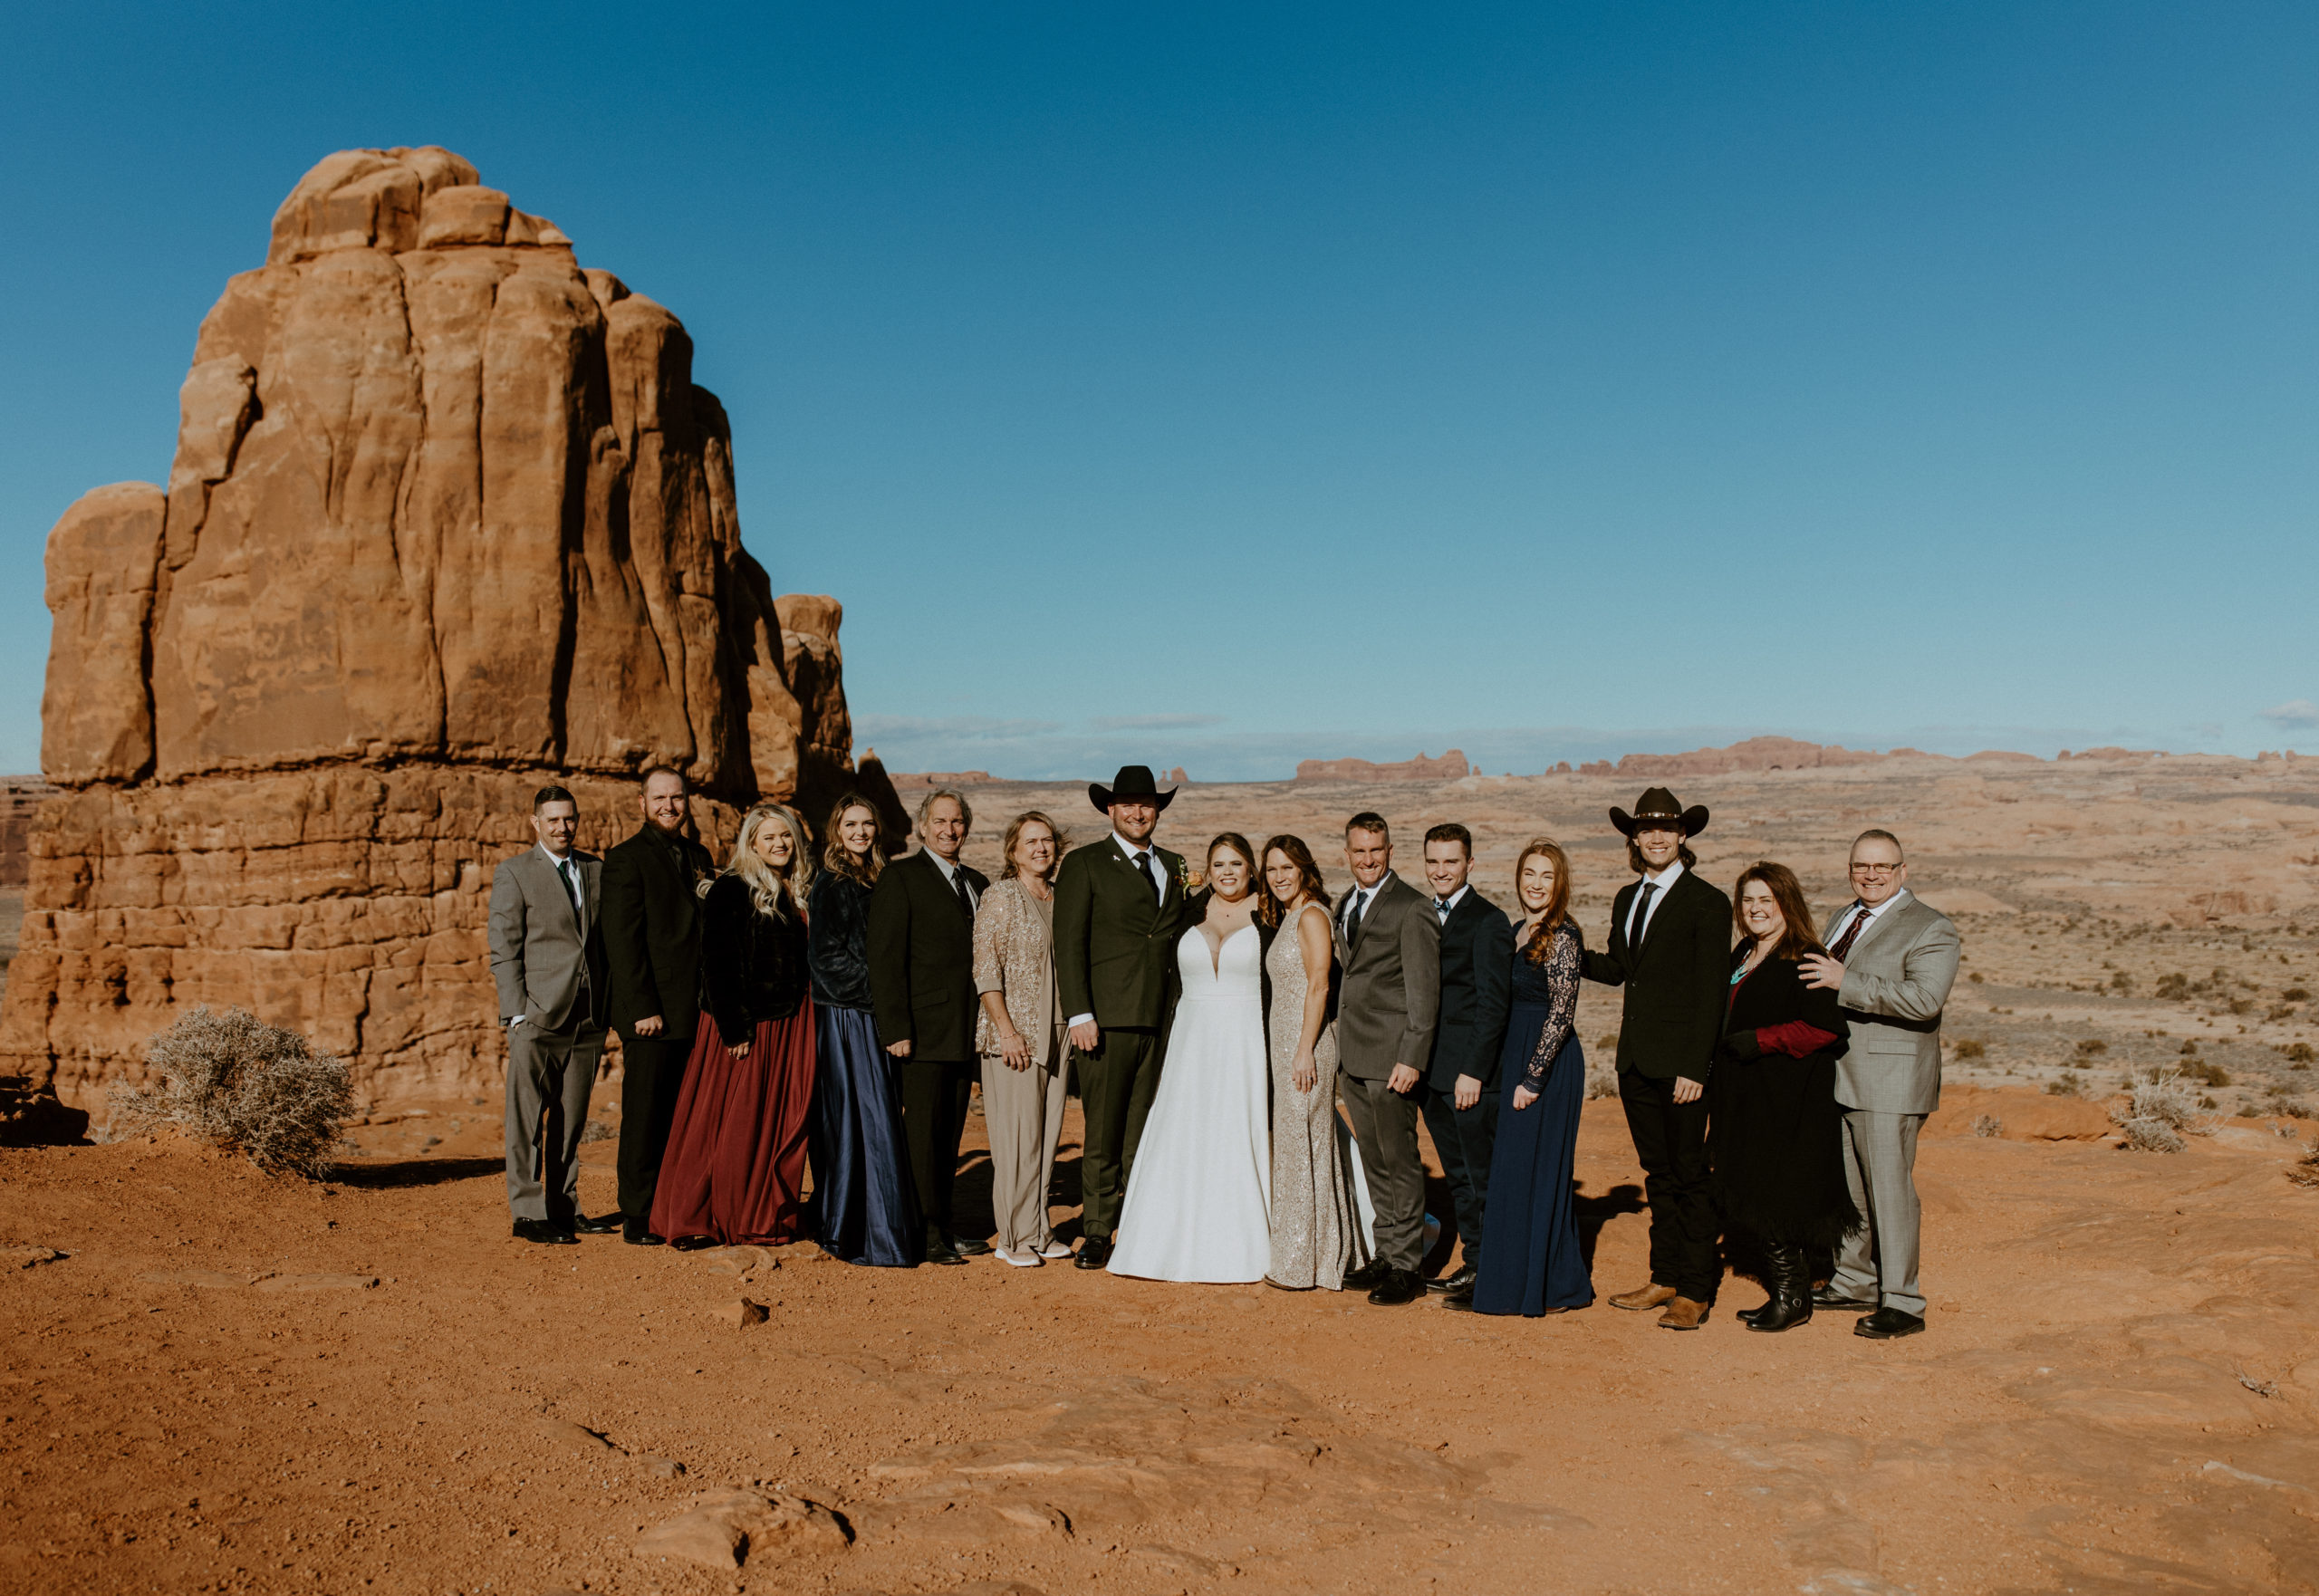 the friends and guests of the intimate wedding ceremony